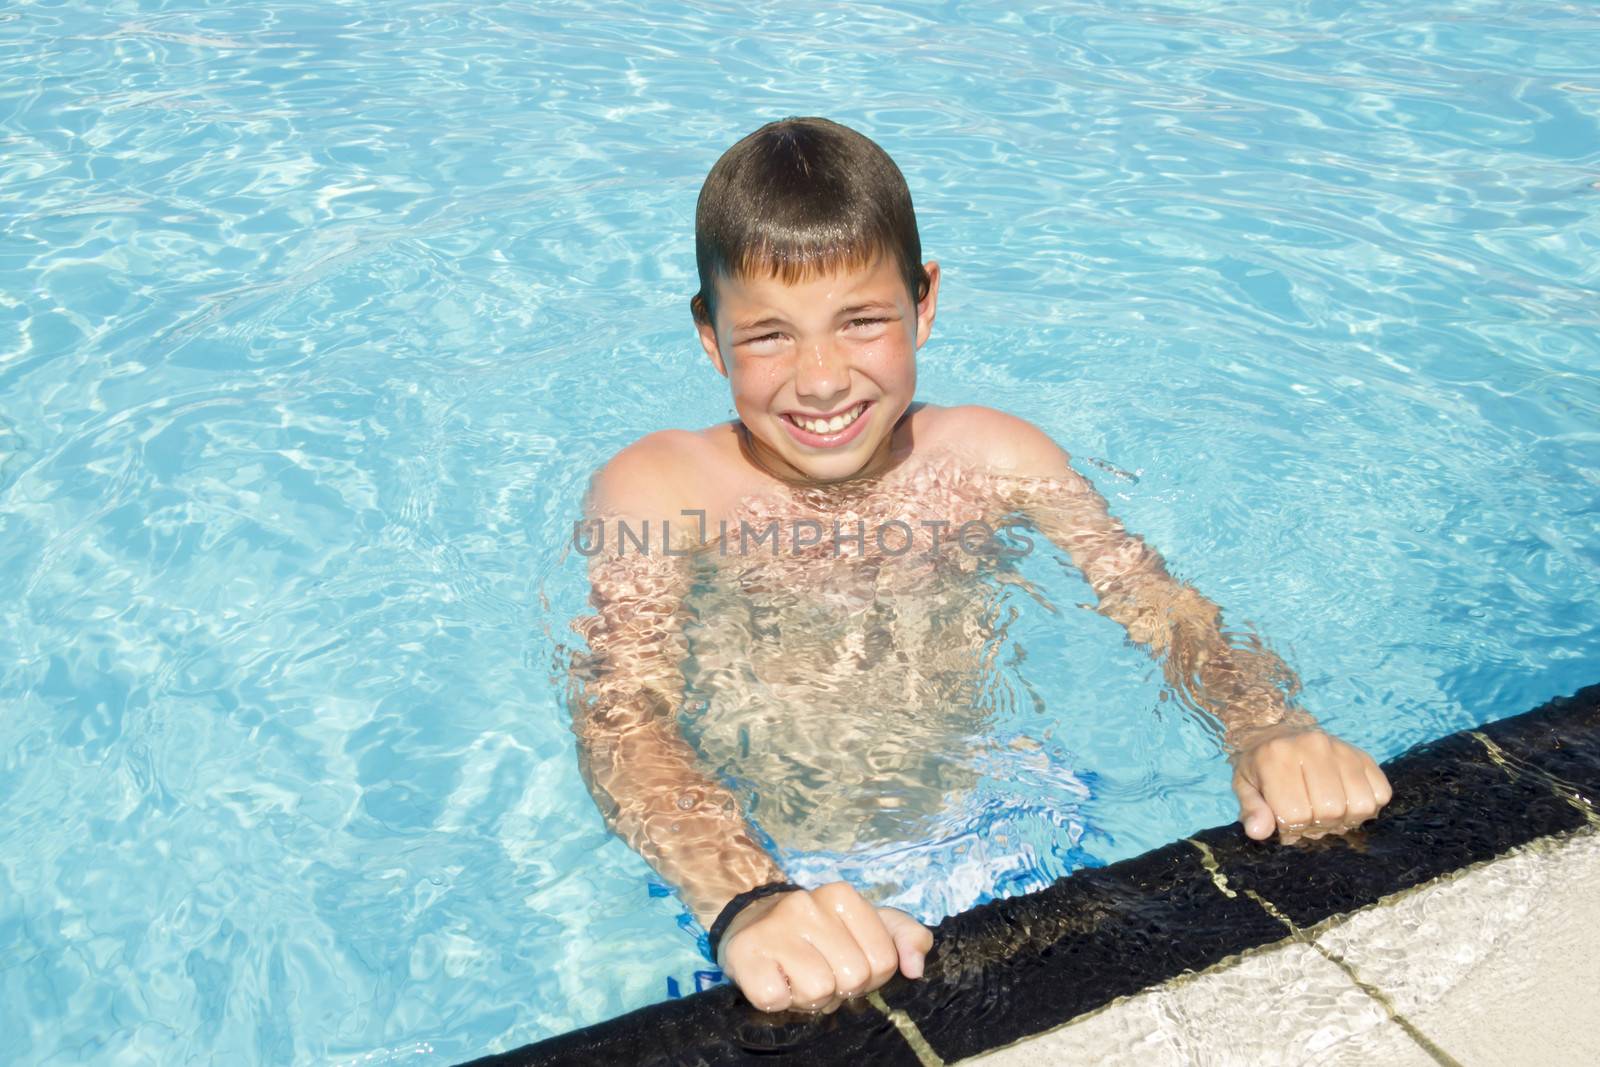 Activities on the pool. Cute boy swimming and playing in water in swimming pool by Tetyana